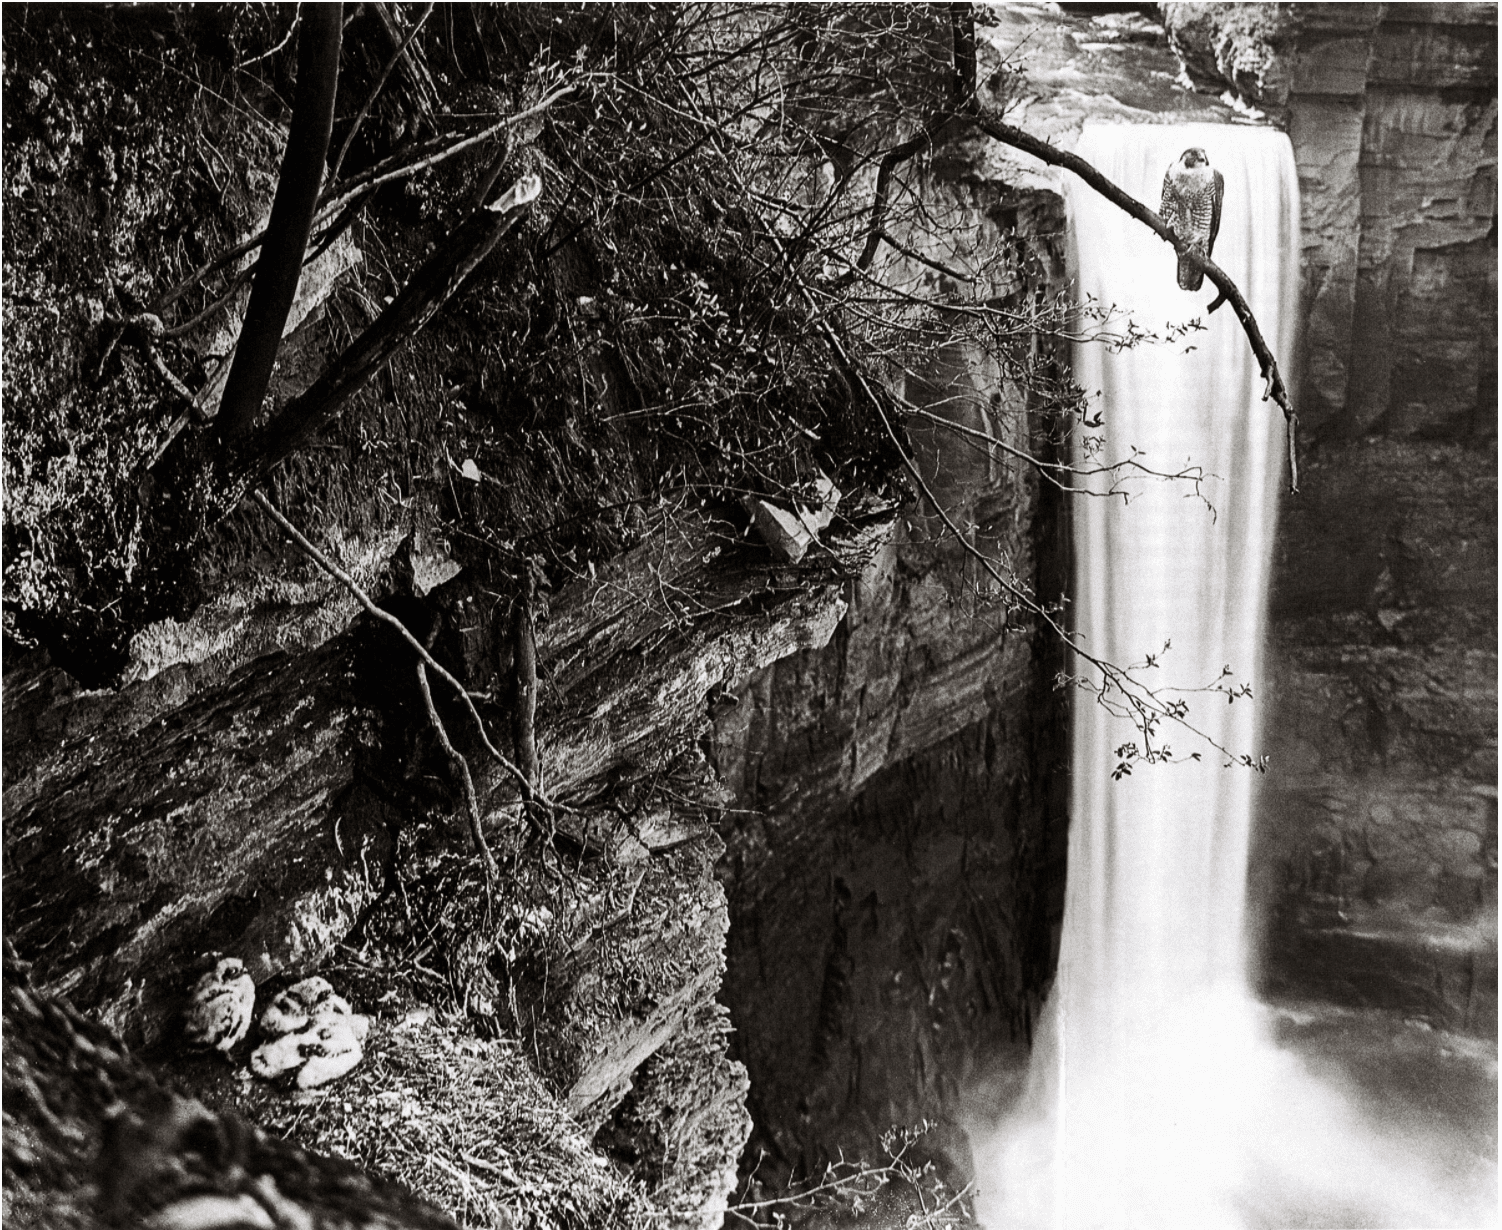 A Peregrine Falcon female and her nestlings in the Taughannock gorge, 1930s. Photo by Arthur Allen.